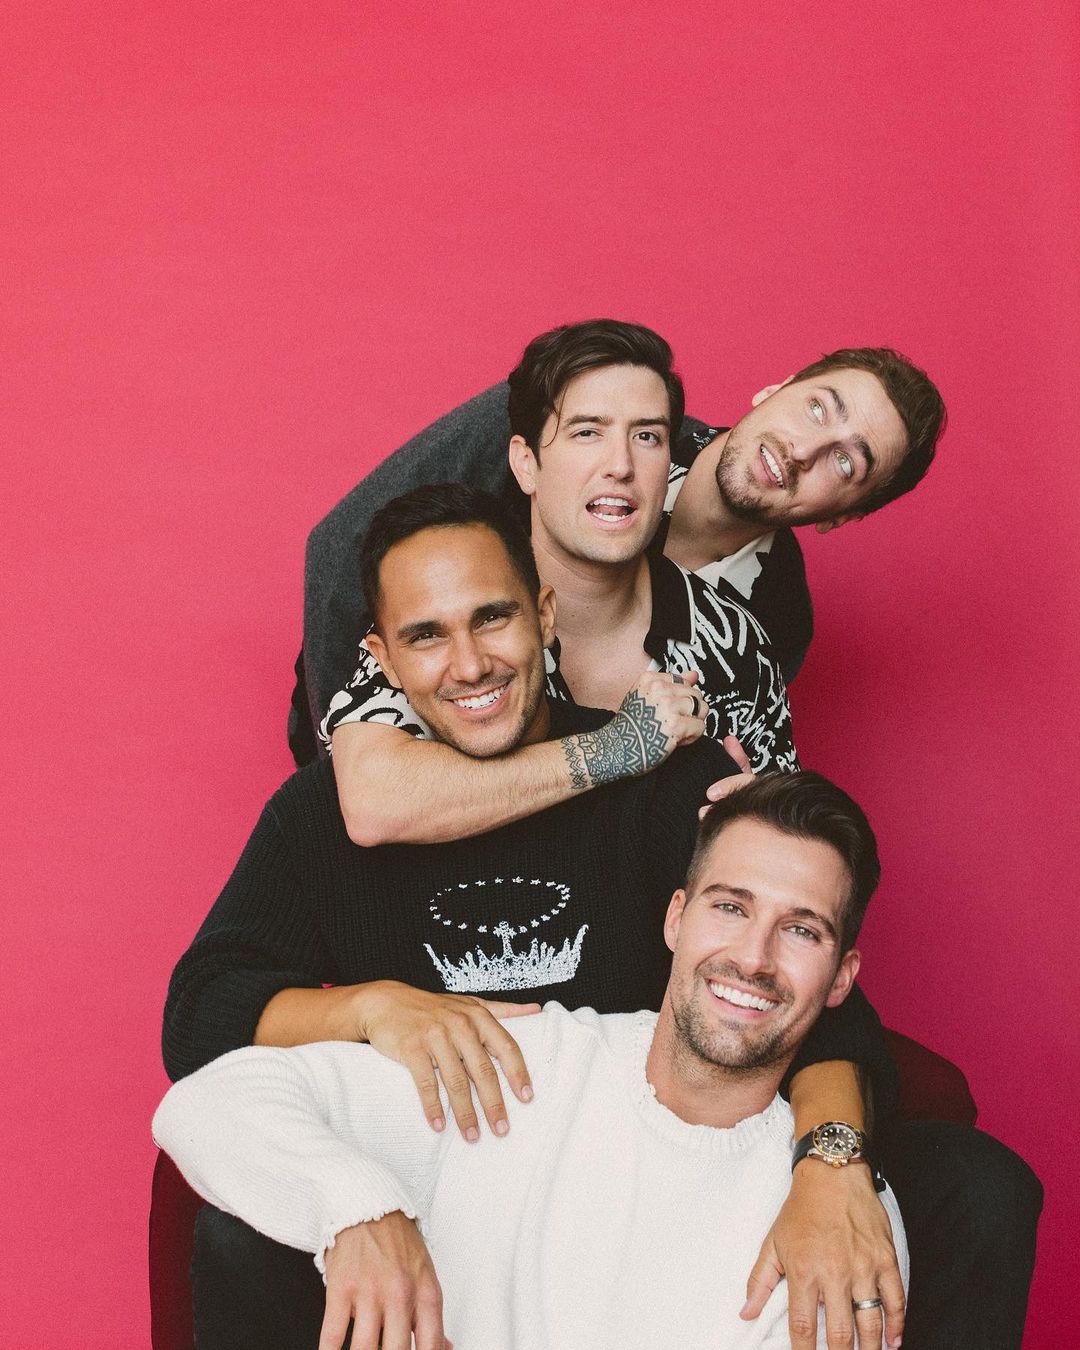 General photo of Big Time Rush